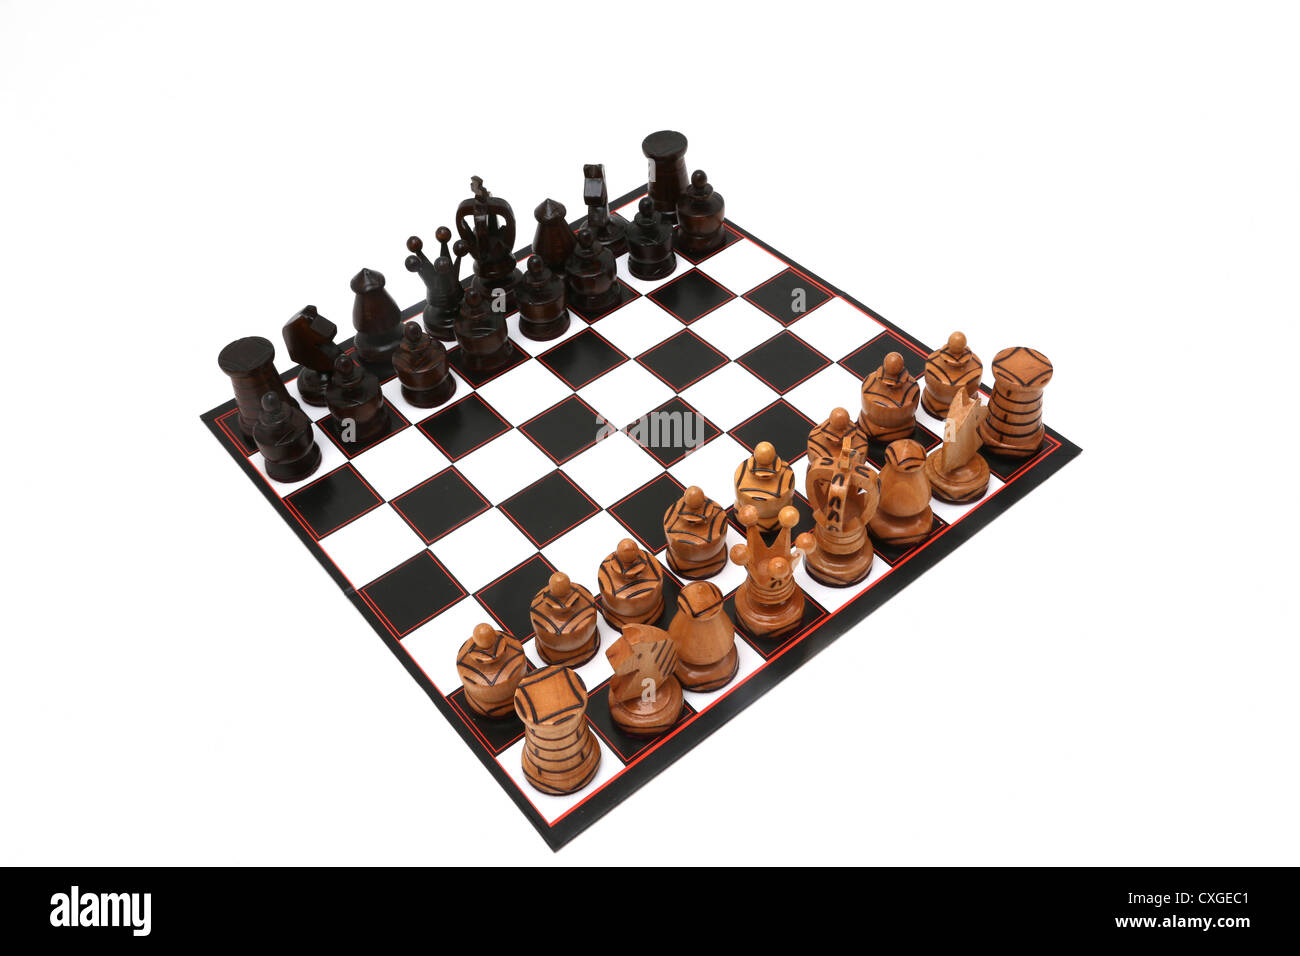 Chess Board With Carved Wooden Chess Pieces Stock Photo